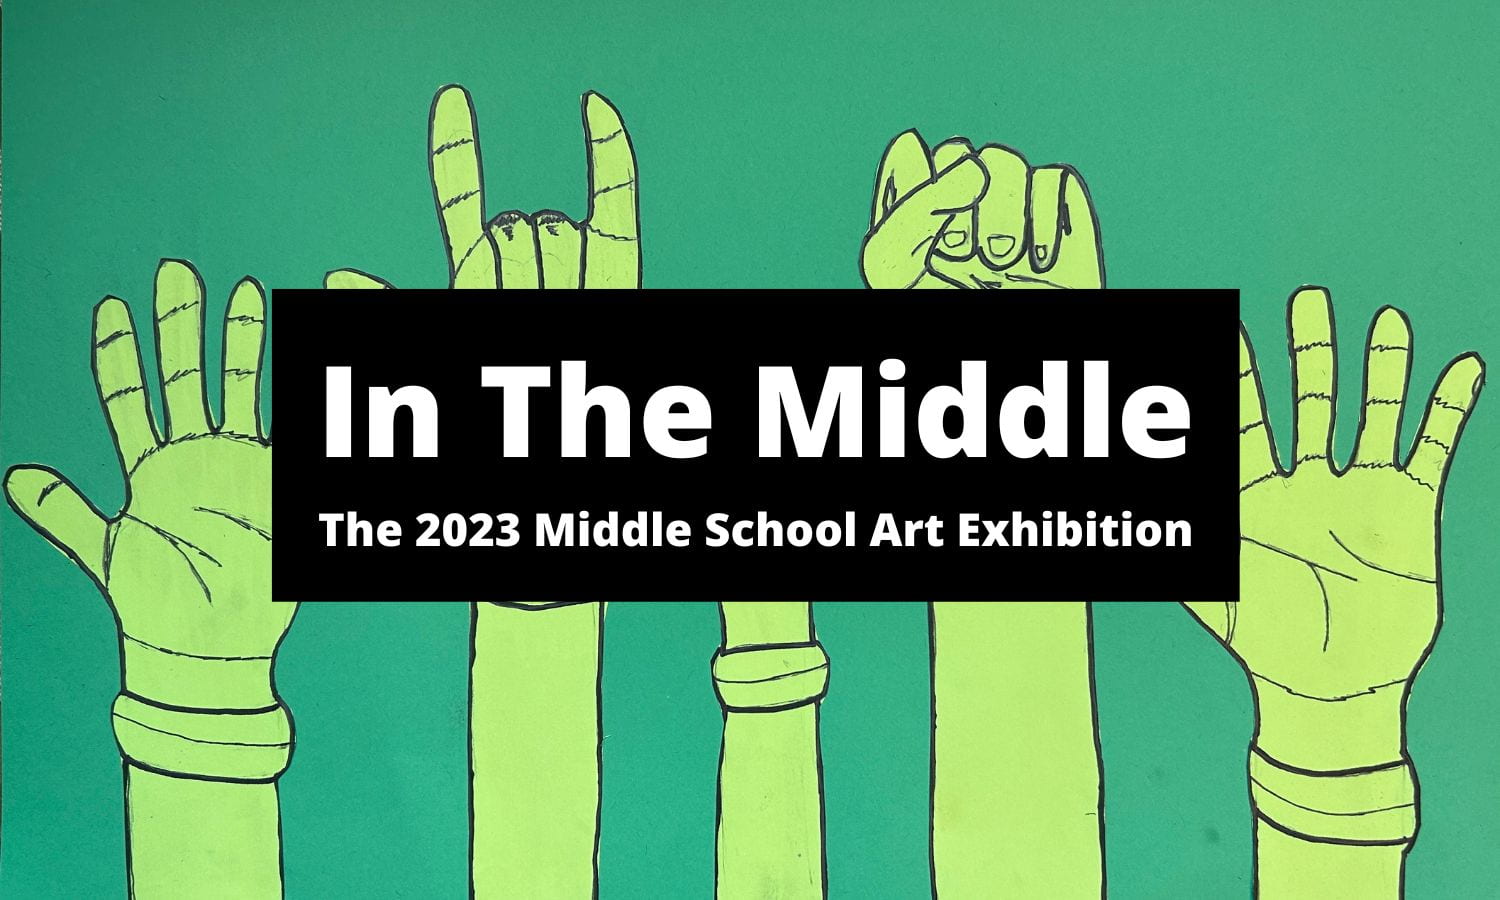 In The Middle; The 2023 Middle School Art Exhibition